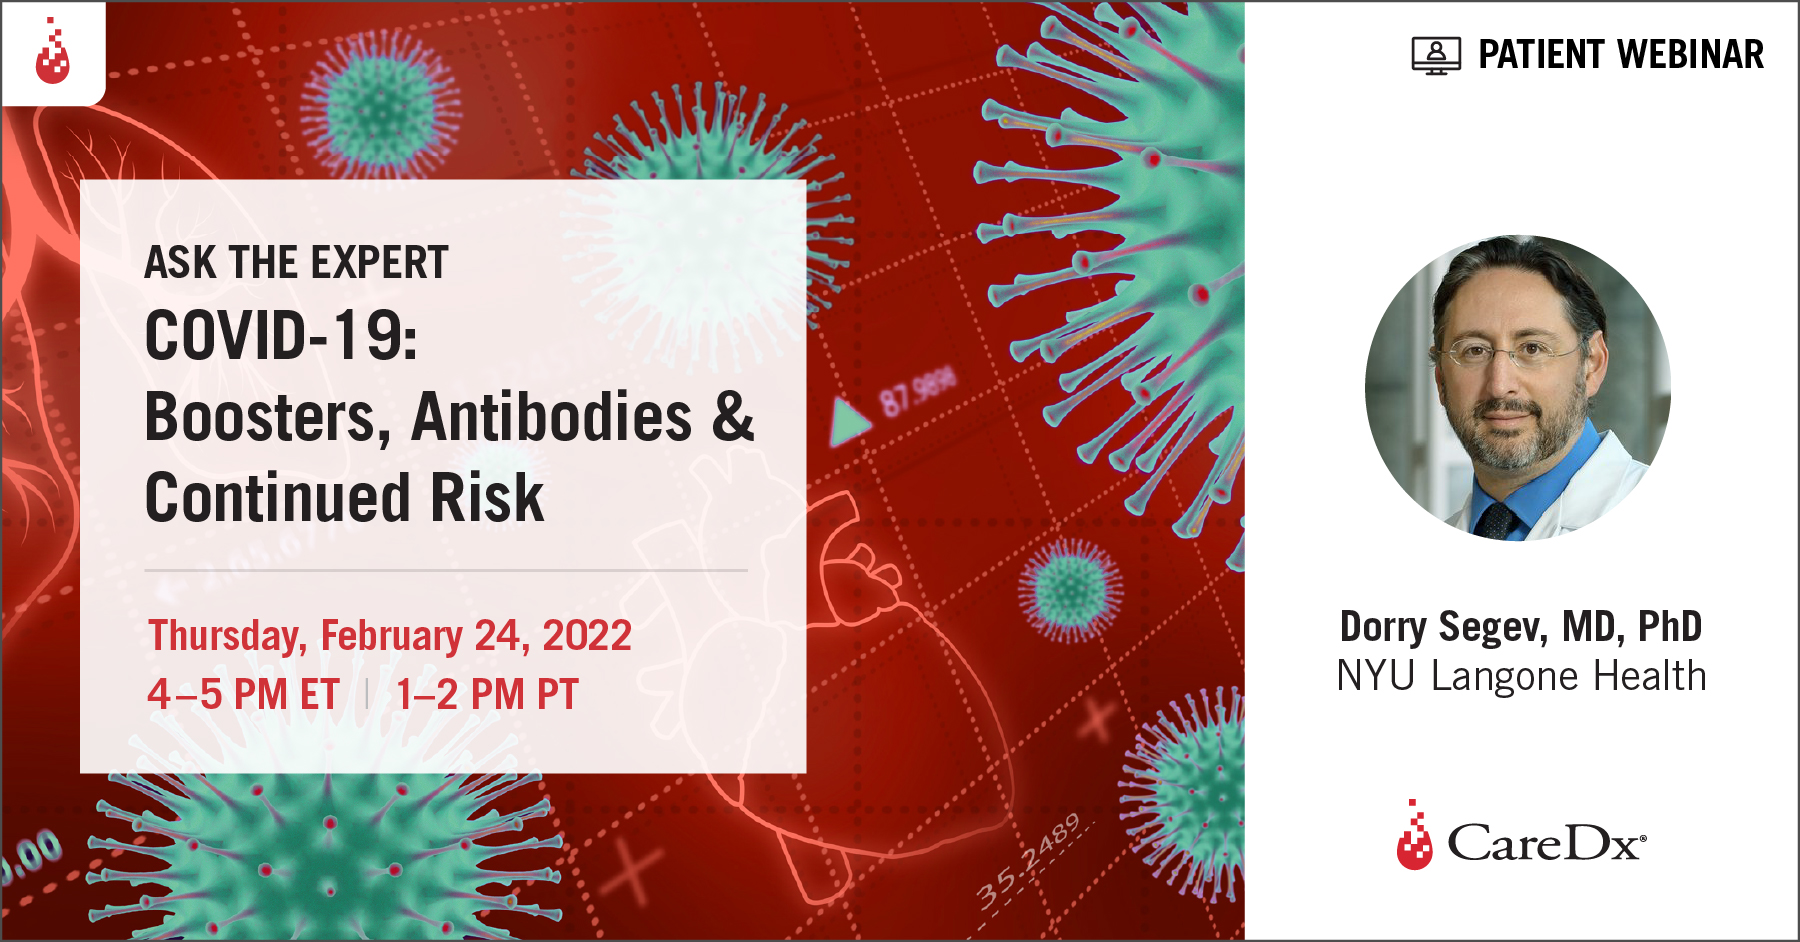 COVID-19: Boosters, Antibodies & Continued Risk